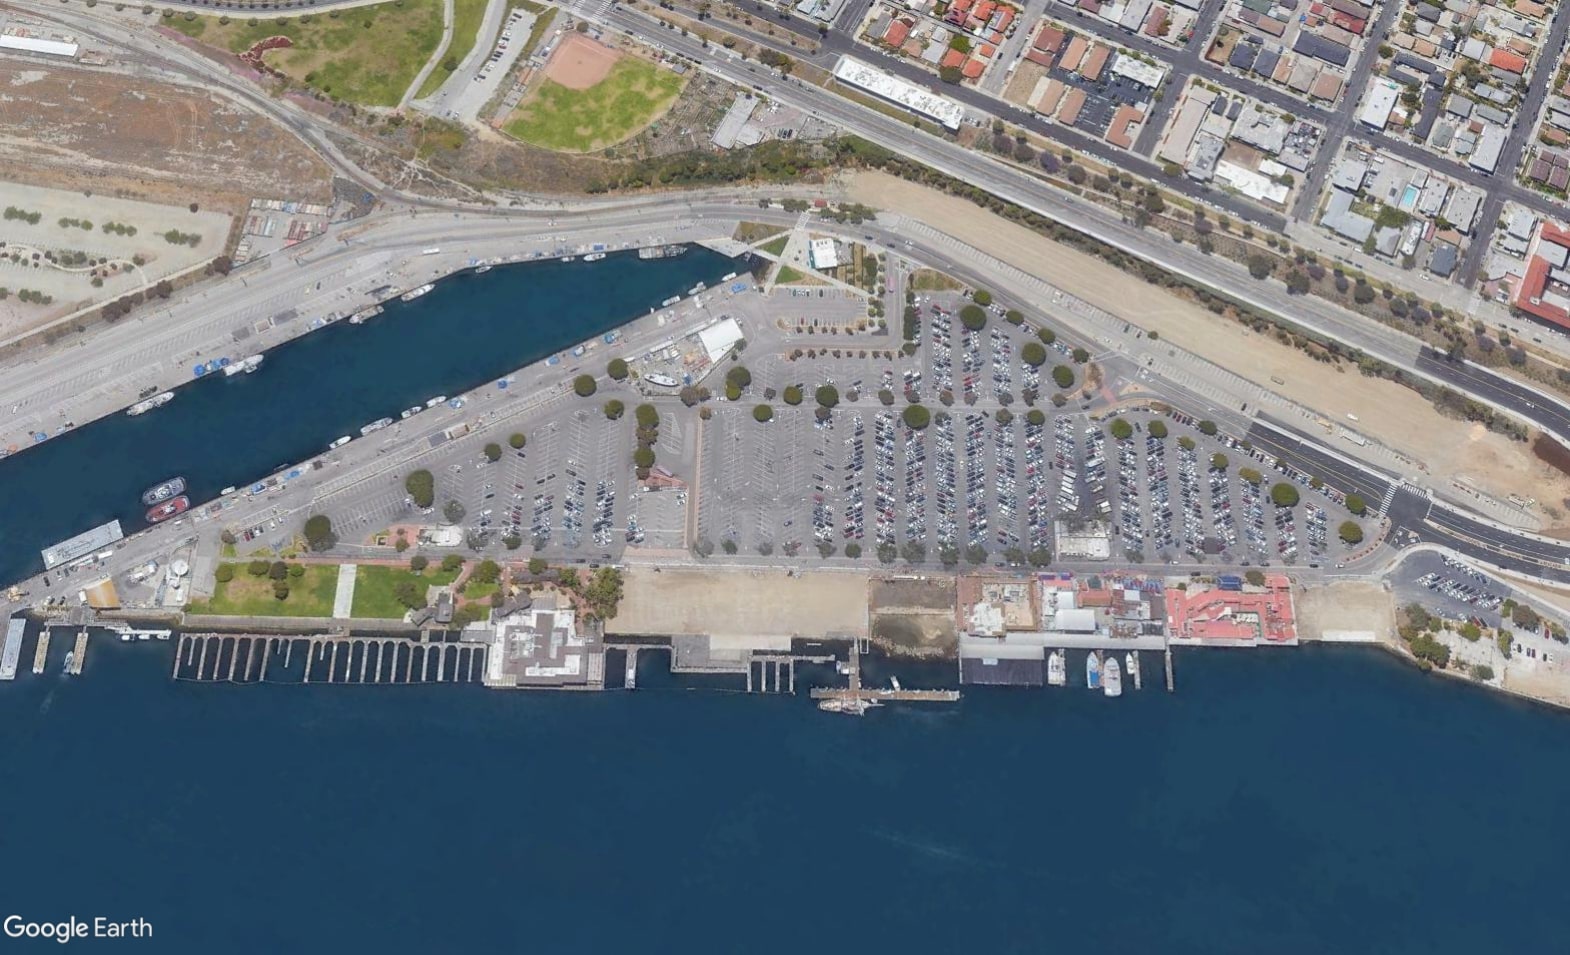 Port of Los Angeles (Berths 76,79 and 83)